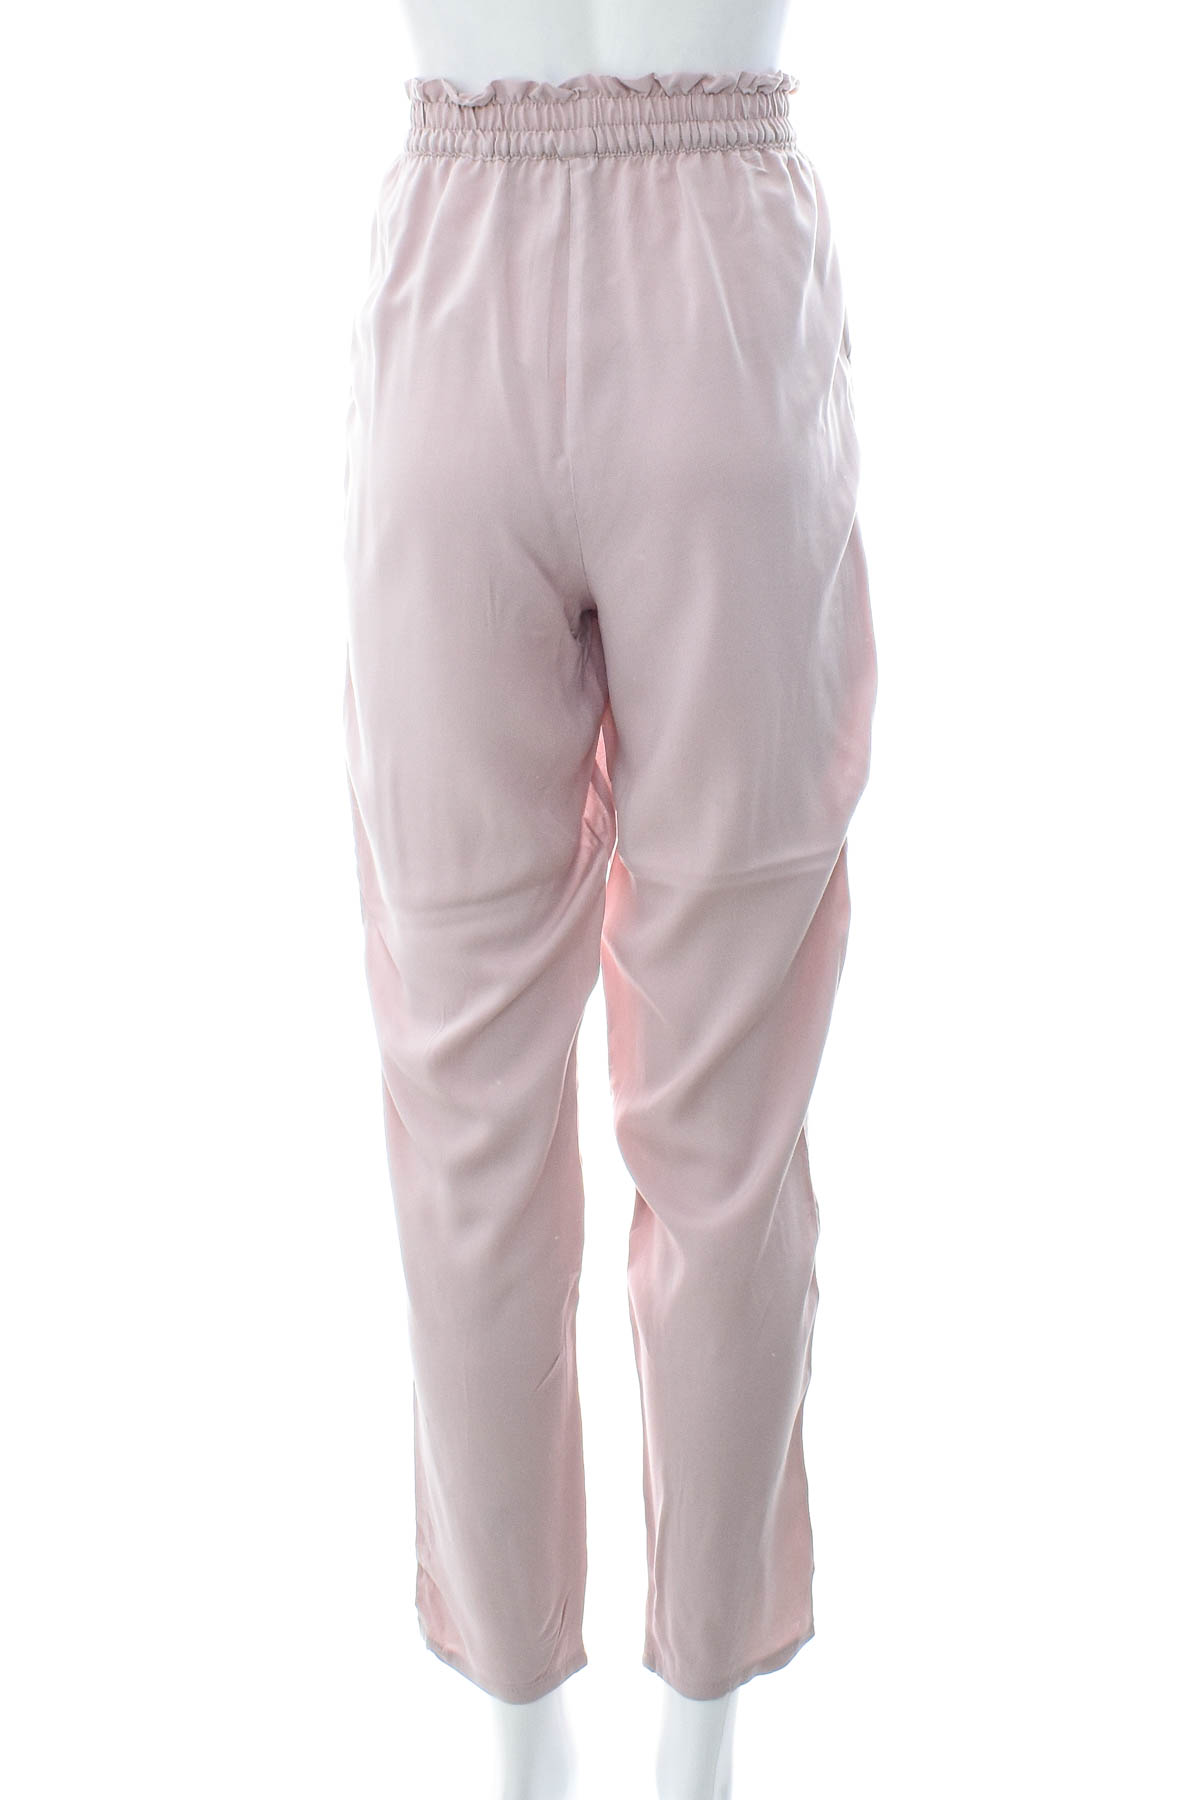 Women's trousers - DIVIDED - 1